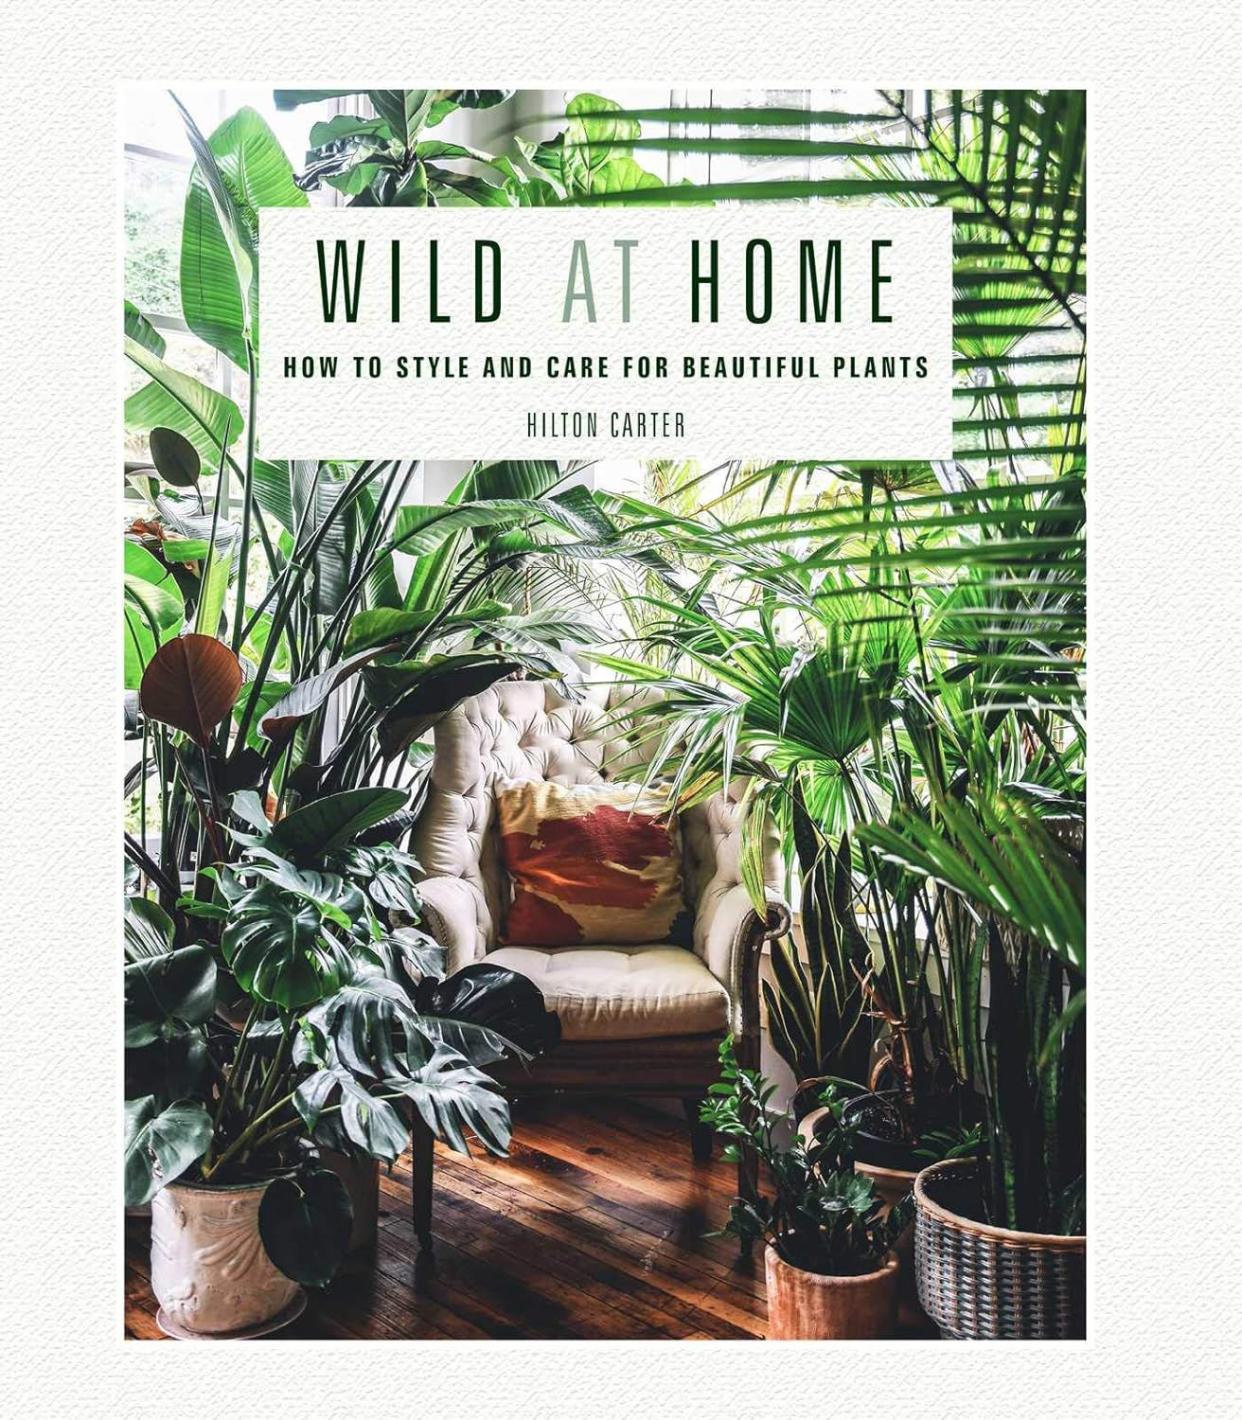 Wild at Home: How to Style and Care for Beautiful Plants, By Hilton Carter